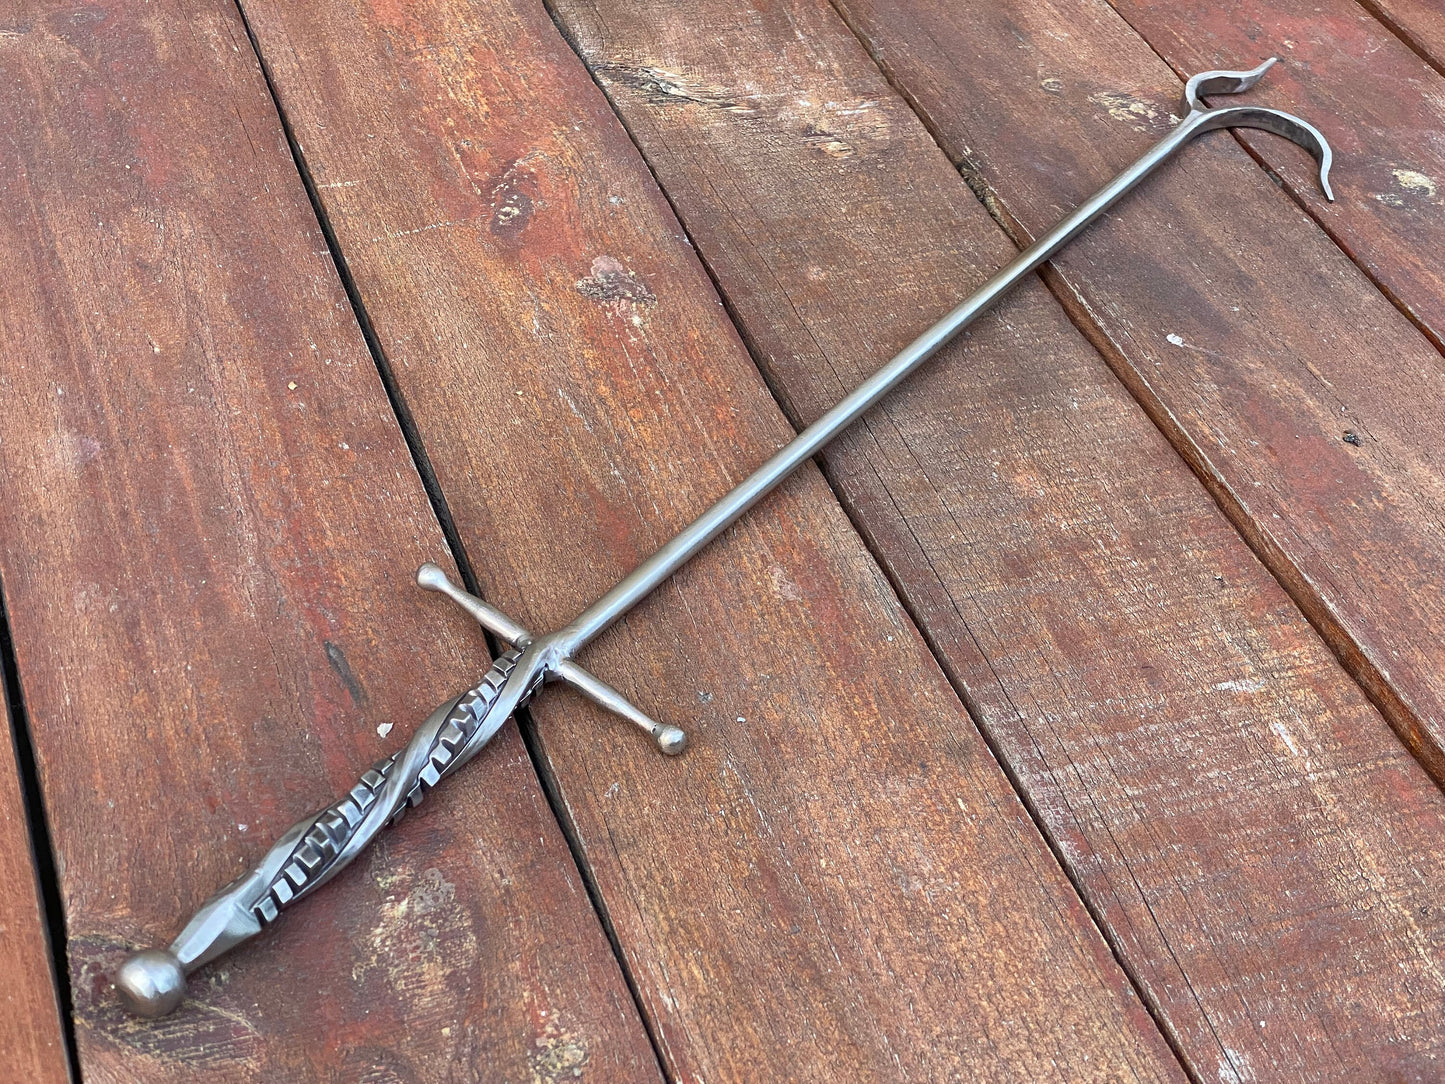 Stainless steel fire poker, fire poker, Christmas, birthday, BBQ, fireplace, firewood holder, personalized gift,mens gift,engagement,wedding